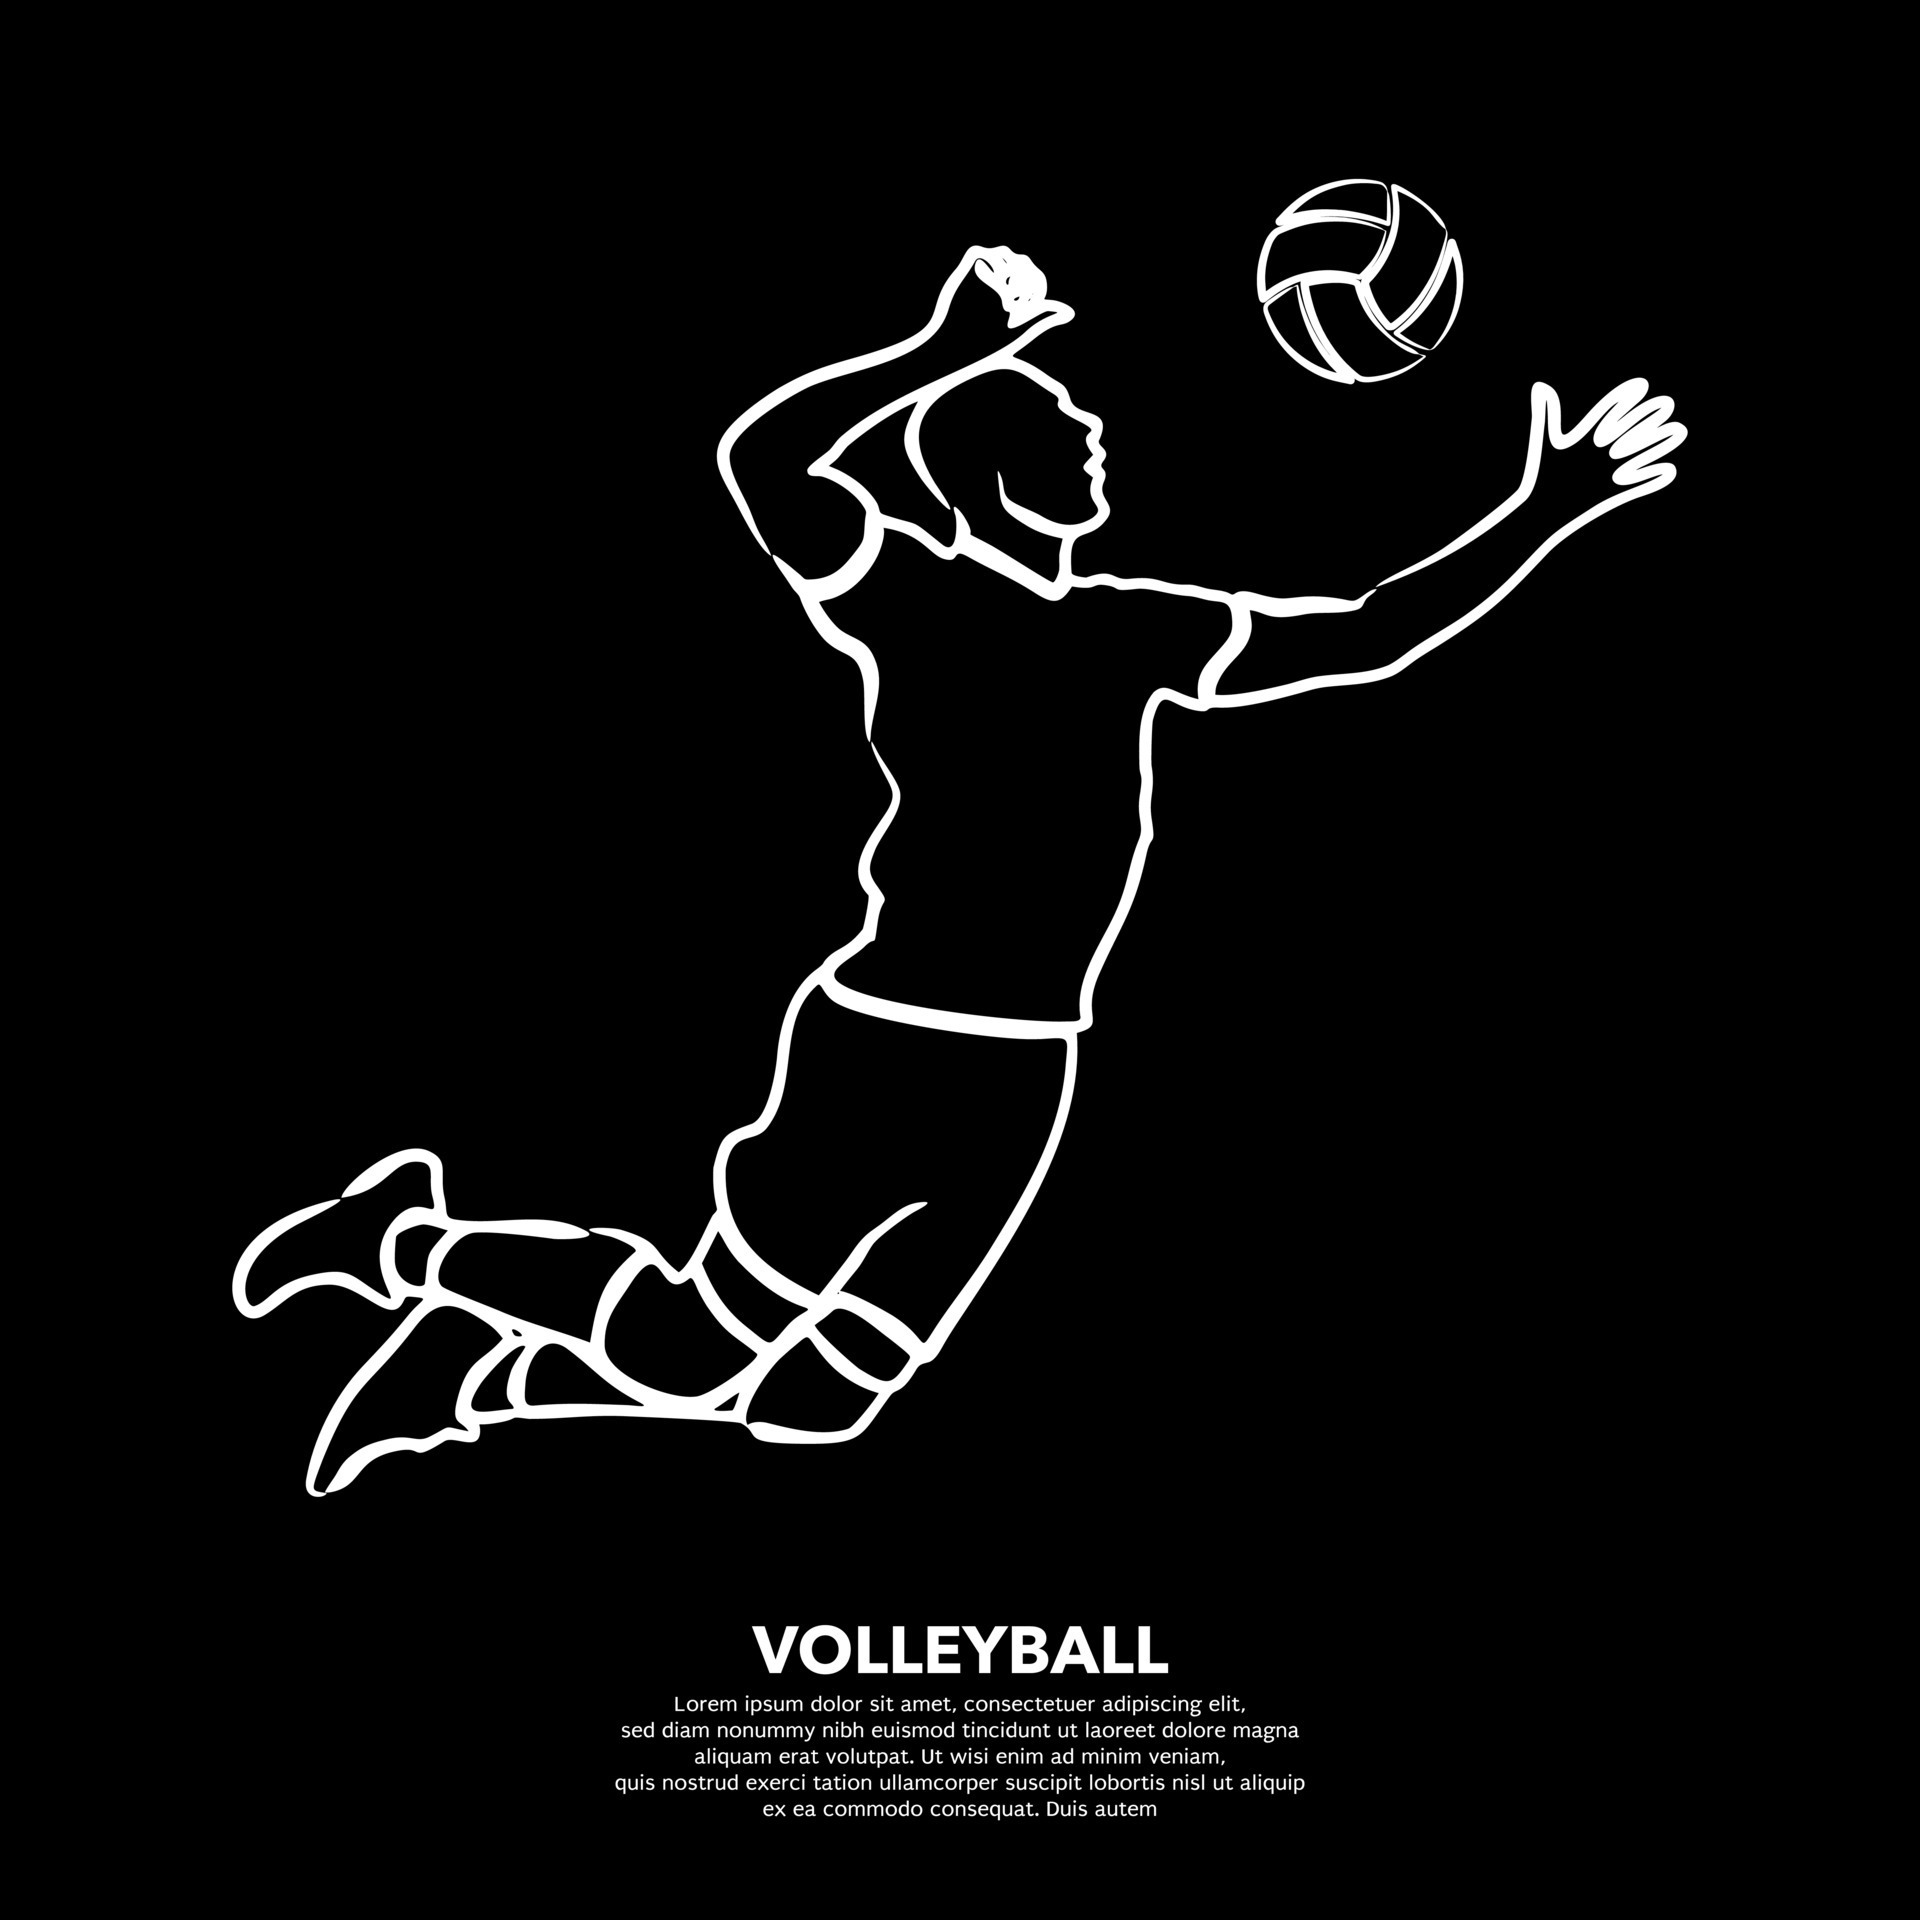 Volleyball on black background  Volleyball Volleyball wallpaper Black  backgrounds